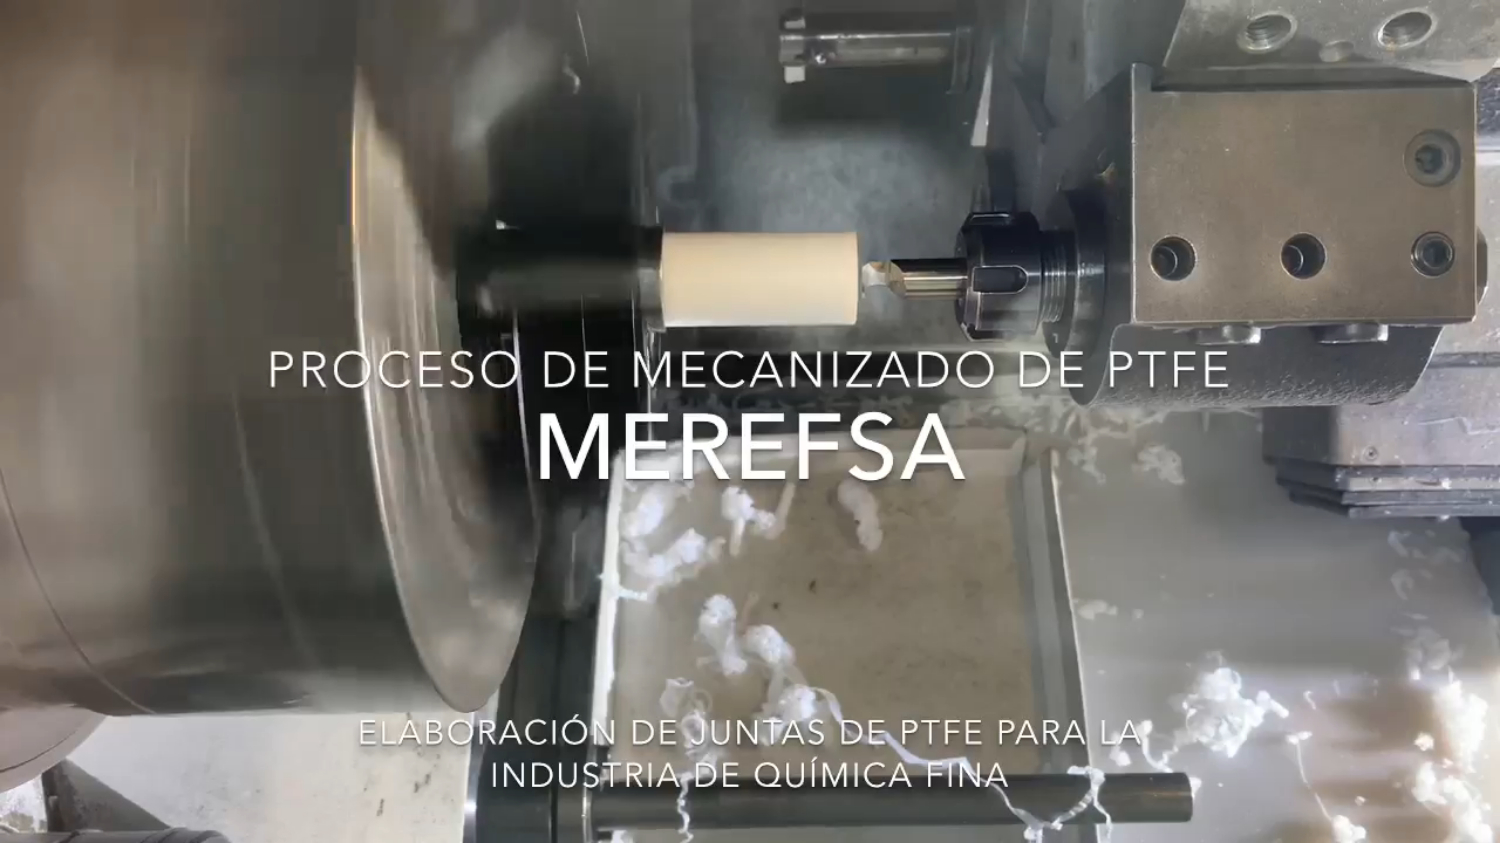 MEREFSA. 50 years of experience in PTFE machining processes